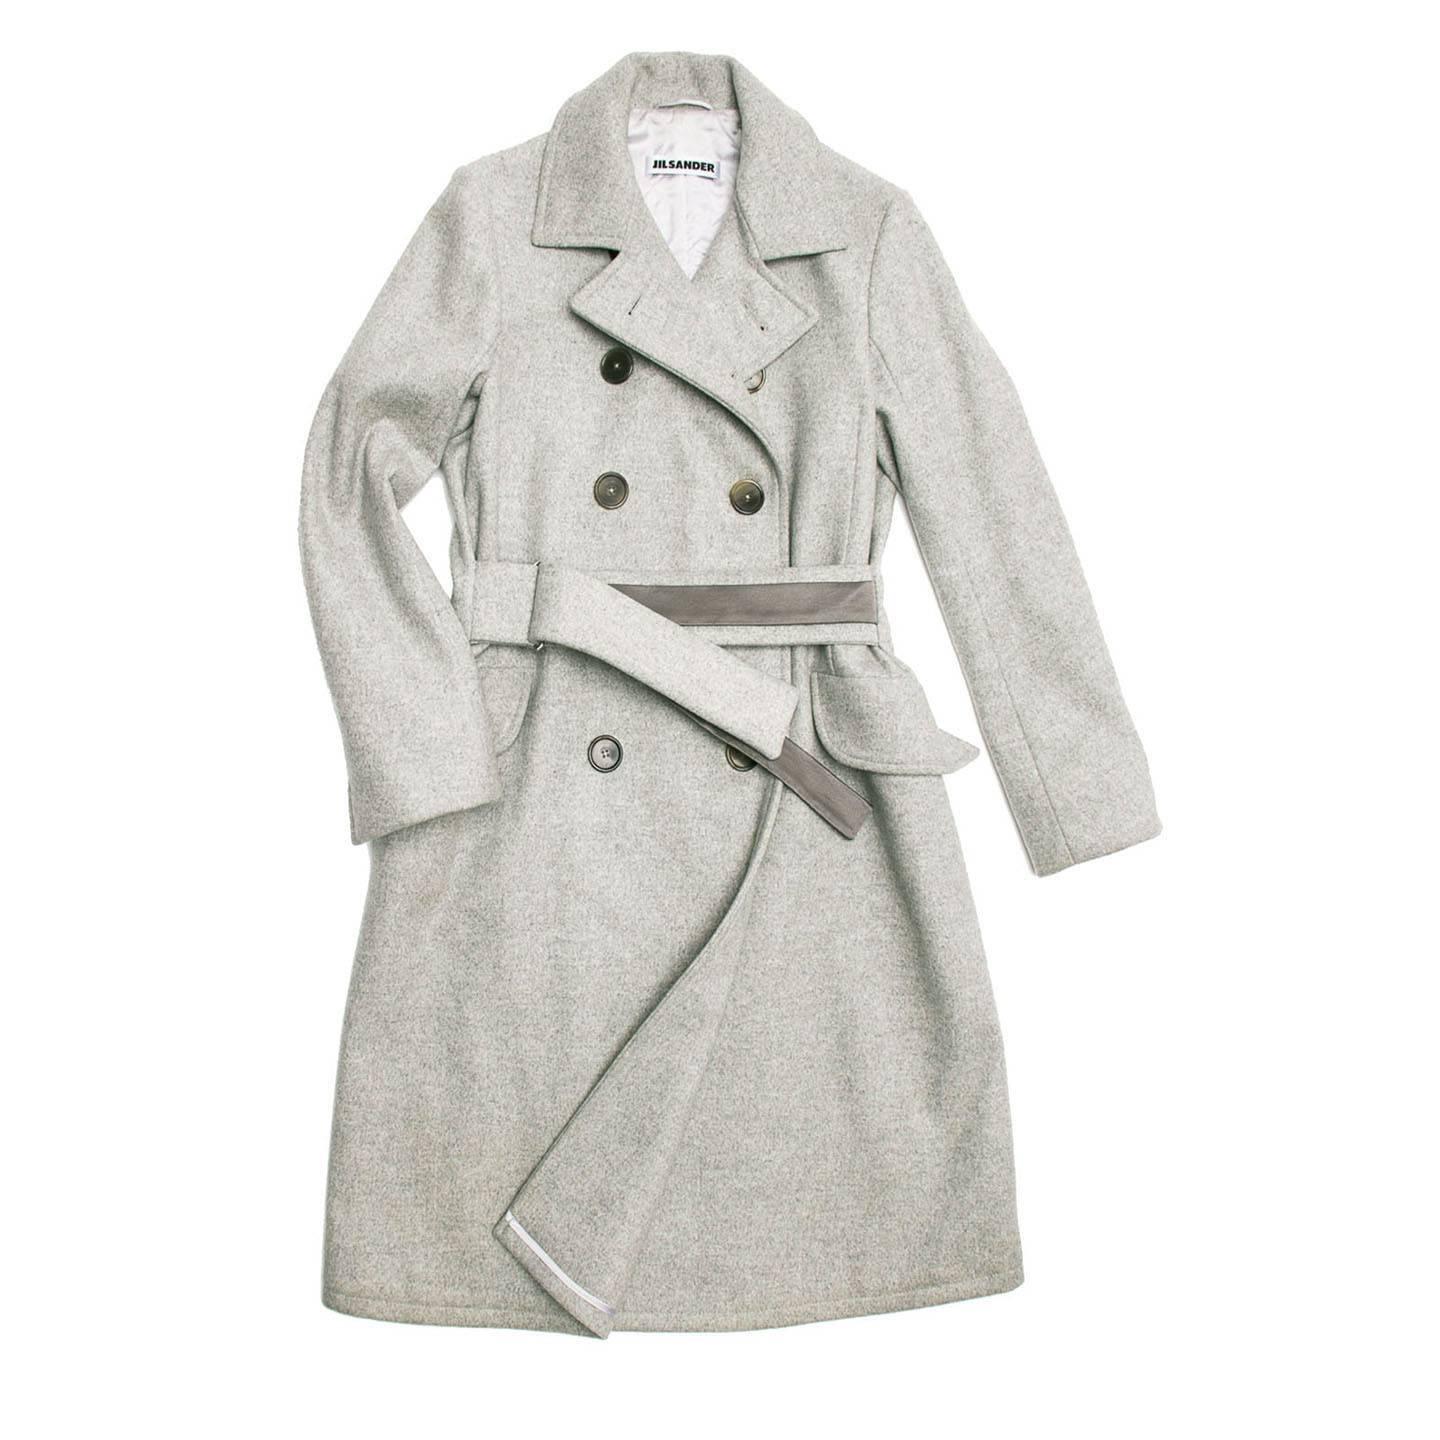 Knee length double breasted ice grey coat with 2 pocket flaps at front. Leather trim at collar stand and atop of belt. Belt loops slides through belt loop and D-ring at waist.

Size  42 French sizing

Condition  Excellent: worn a few times